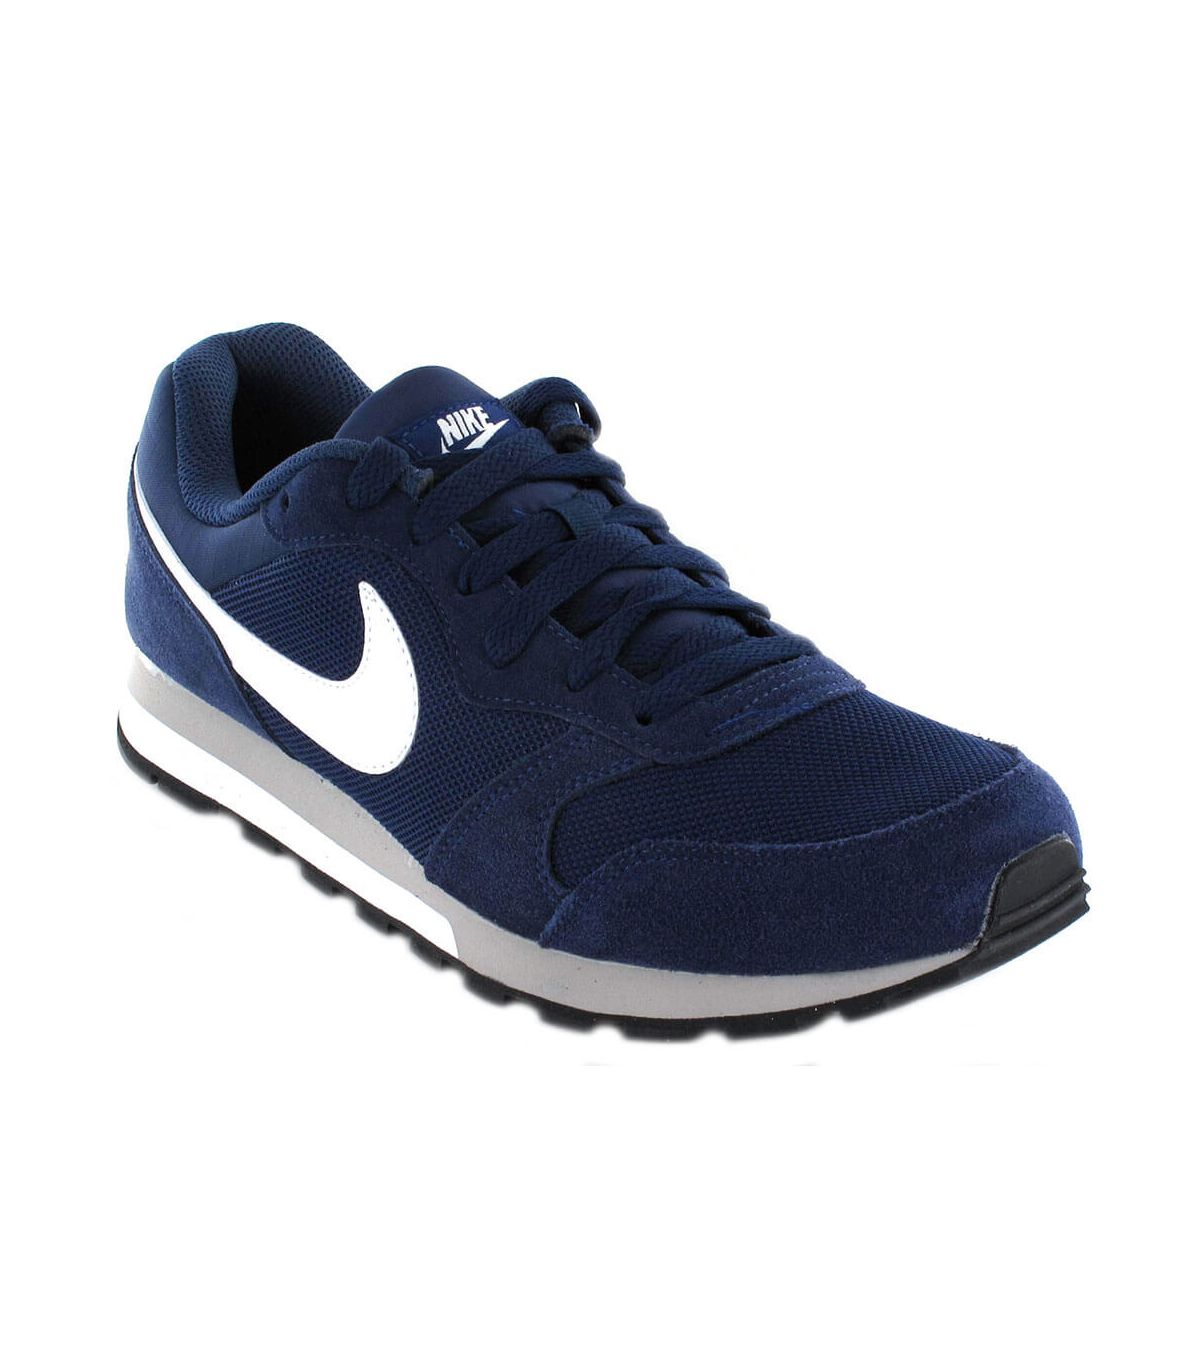 Partially Policeman coupler ➤Nike MD Runner 2 Blue - Casual Footwear Man l Sizes 40.5 Colour Blue